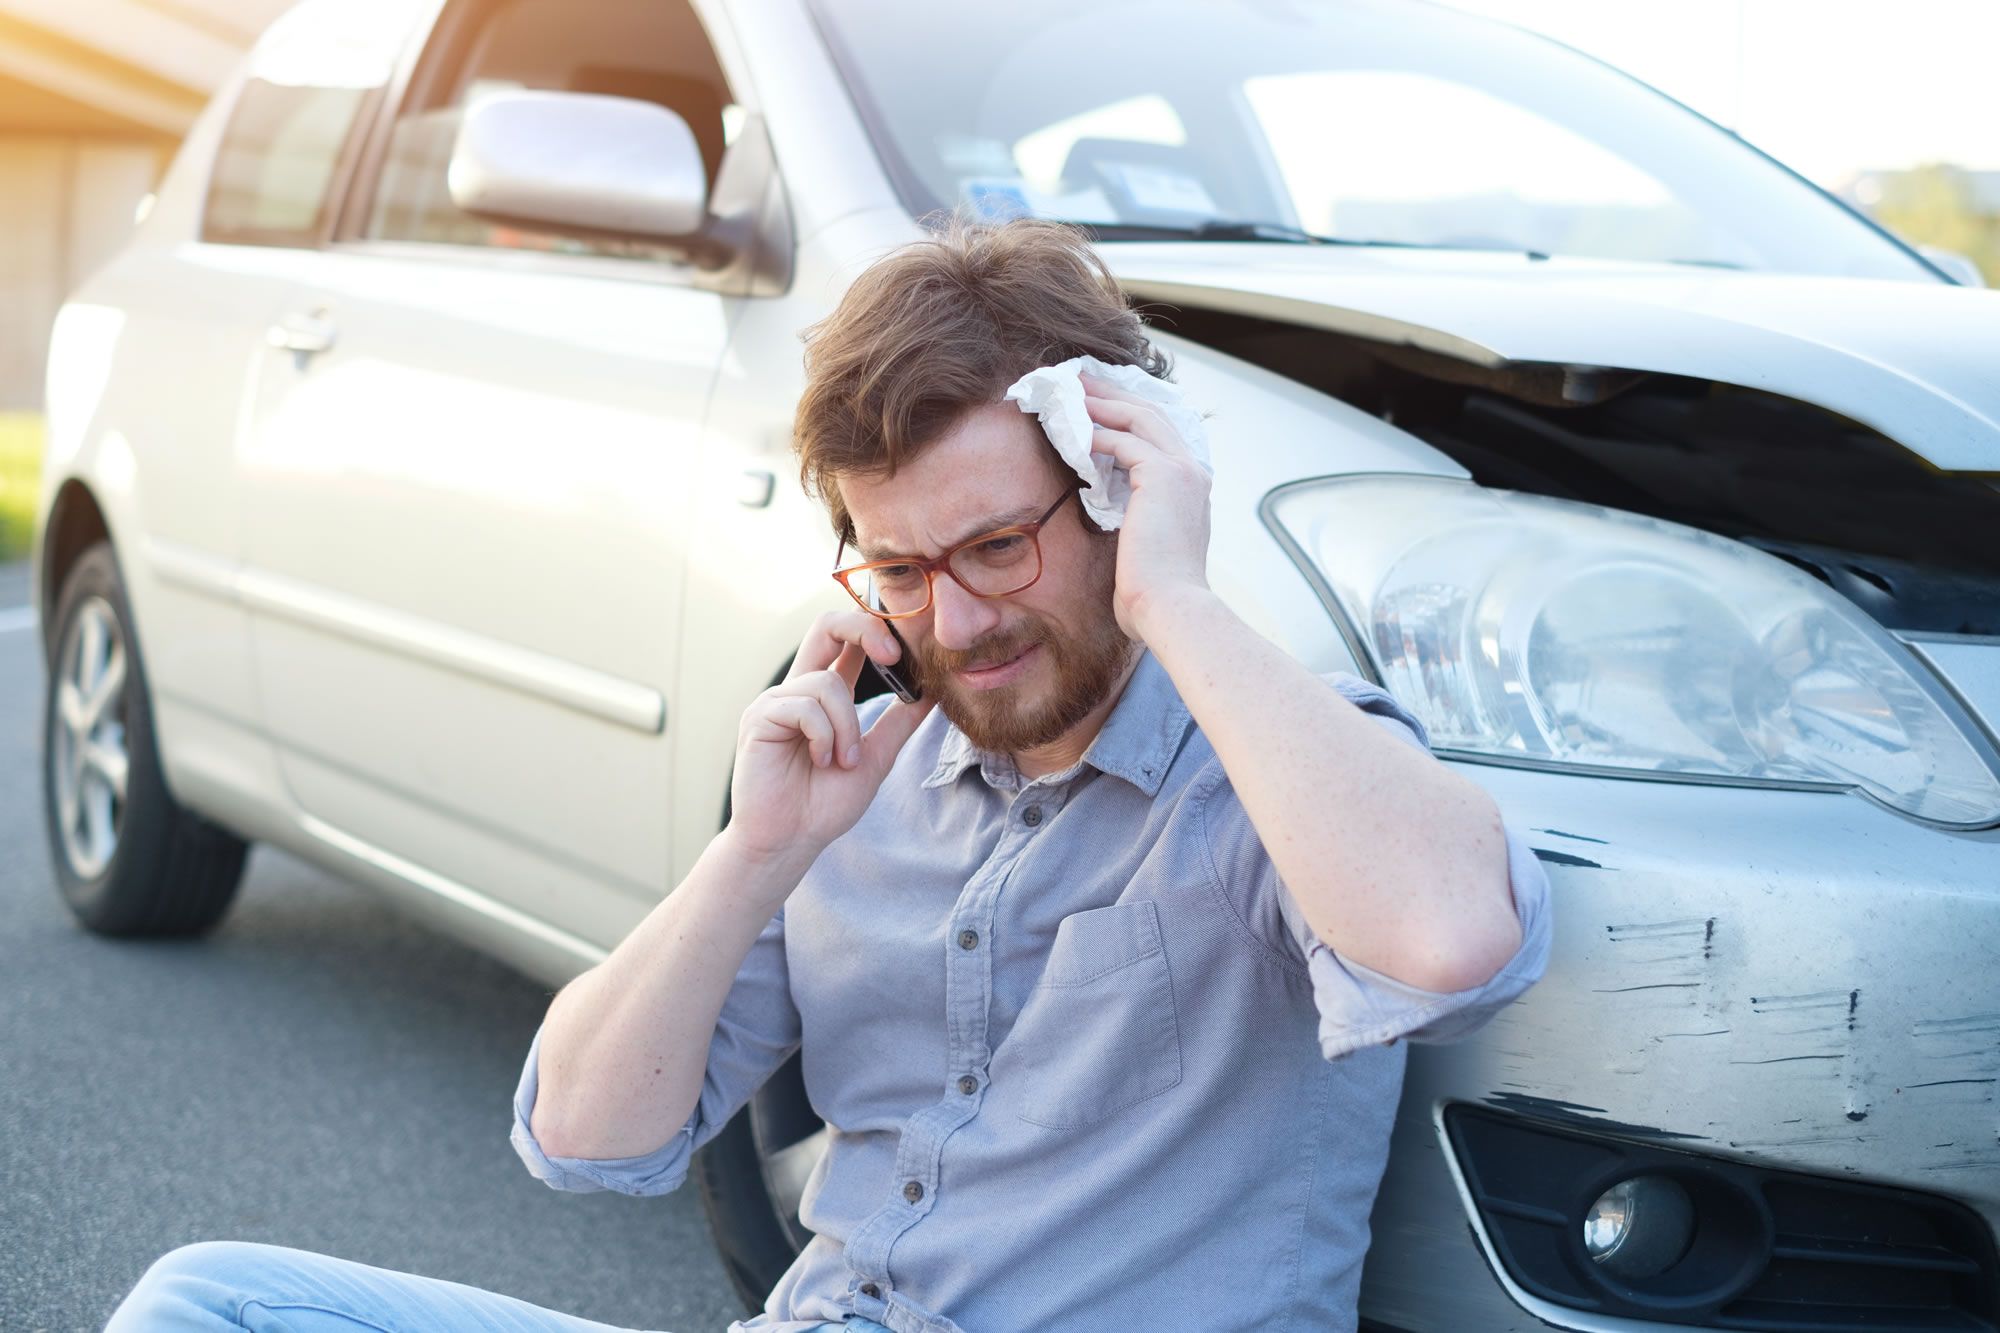 Road Traffic Collision - Car Injury - auto accident claims Solicitors Leeds